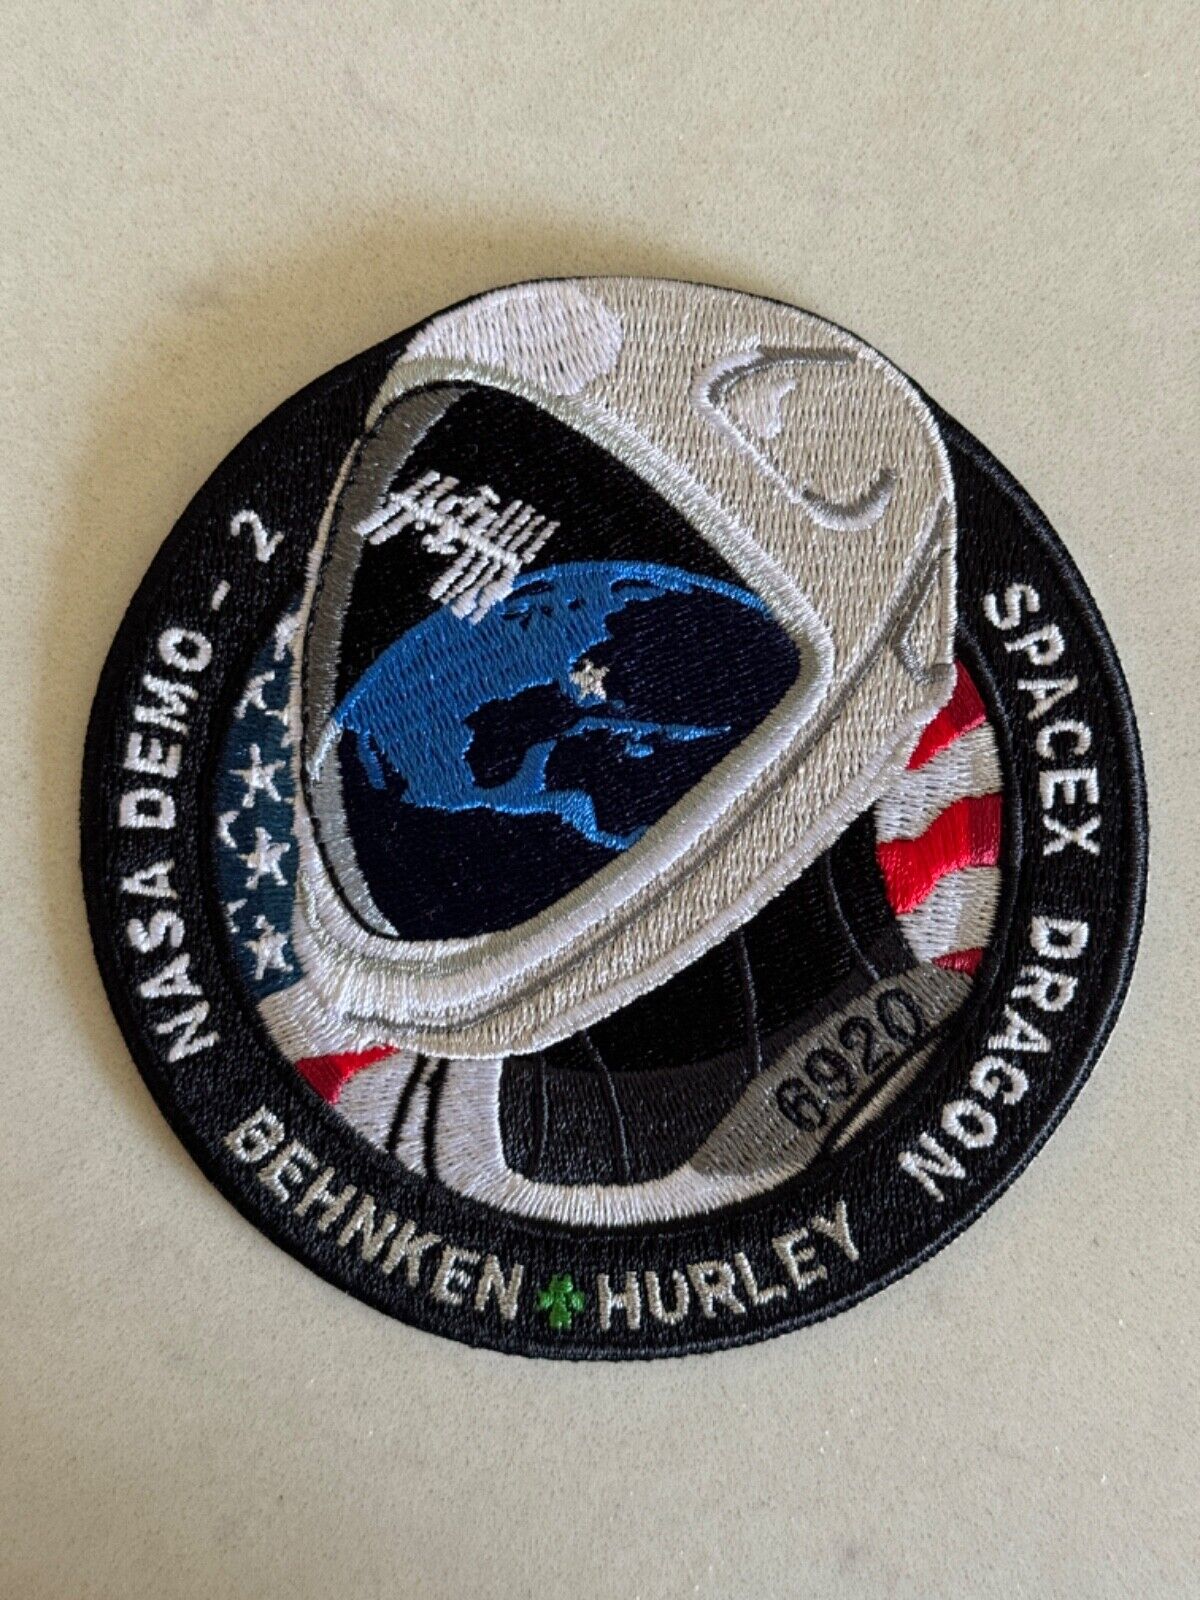 SpaceX EMPLOYEE Number Patch, NASA Crew Dragon Demo-2, Falcon 9